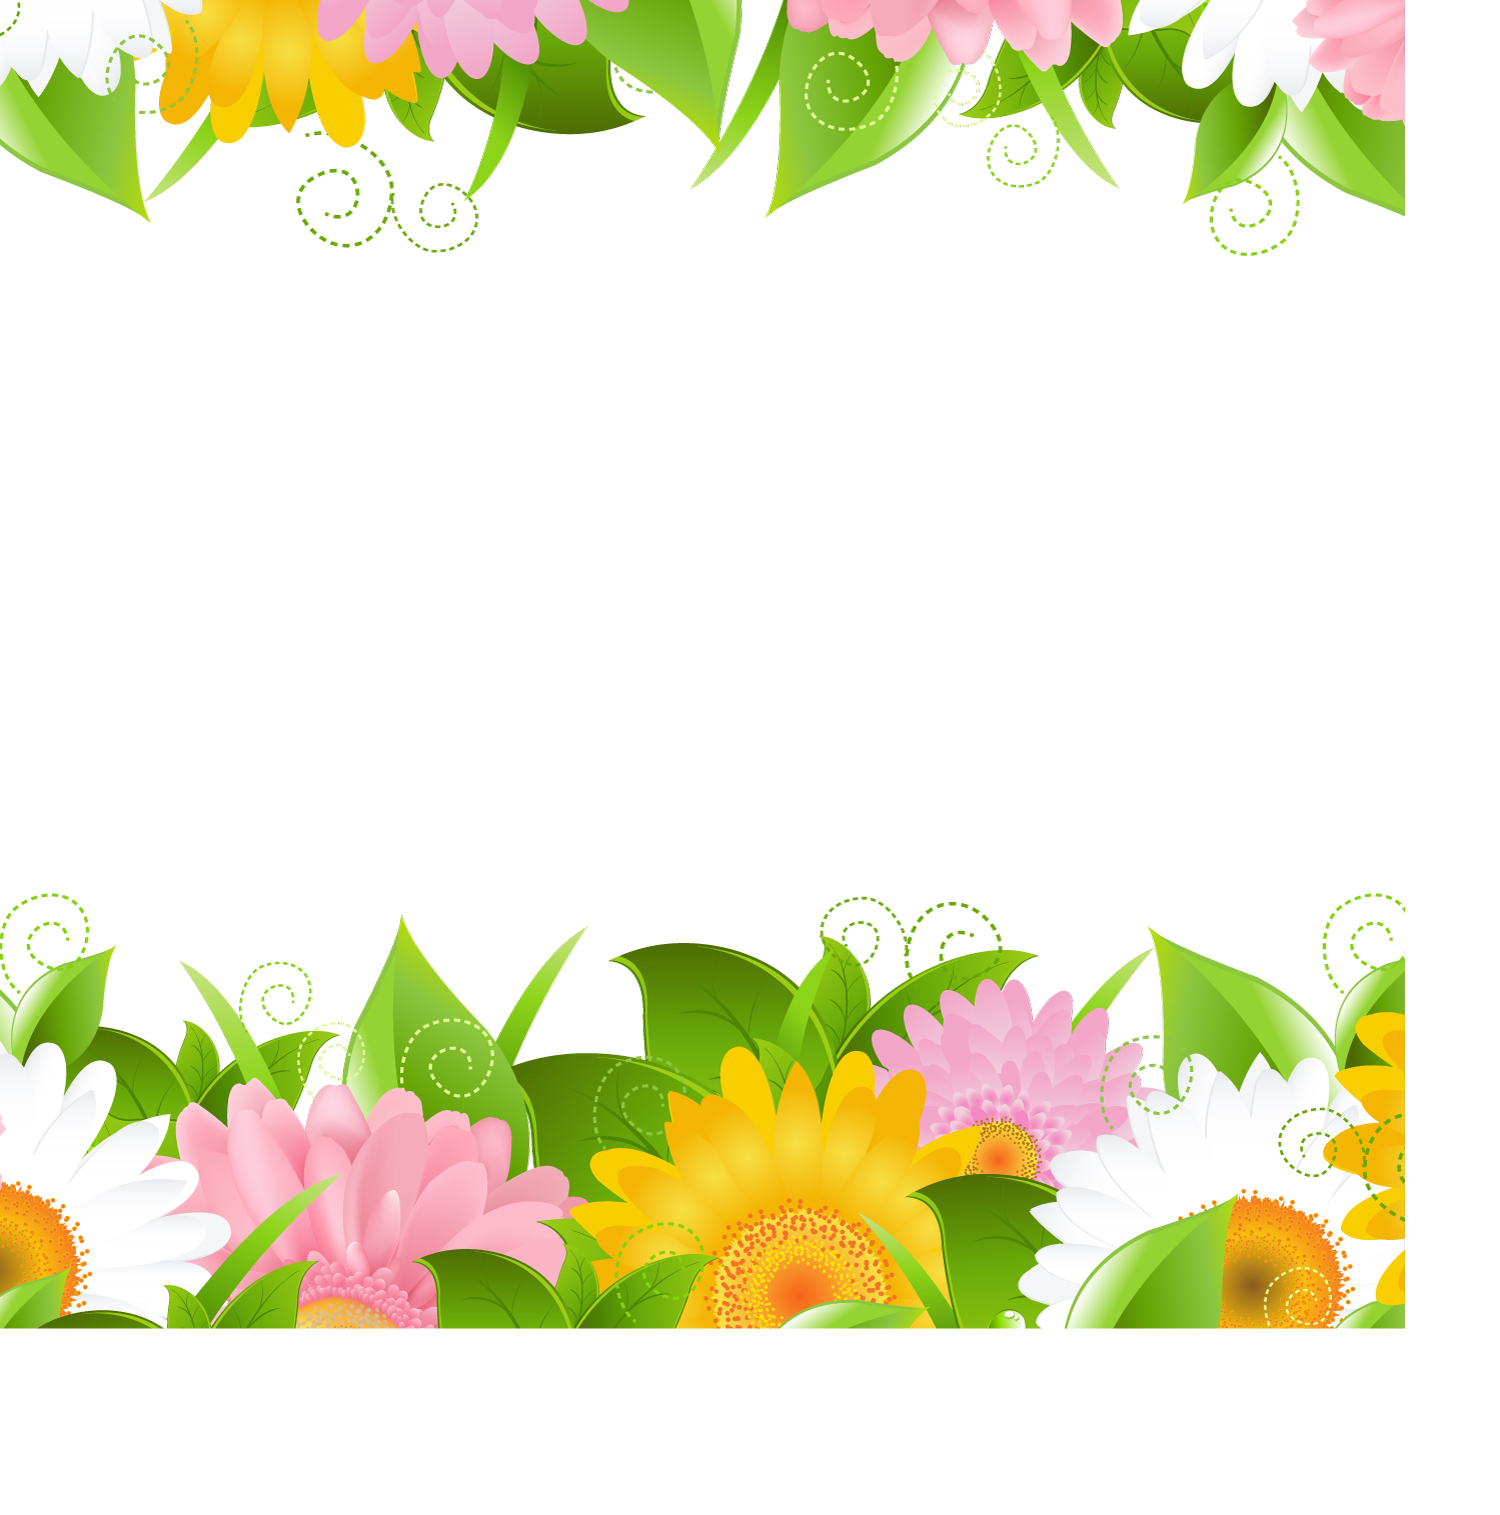 Flowers petals lace background 02 vector Free Vector / 4Vector